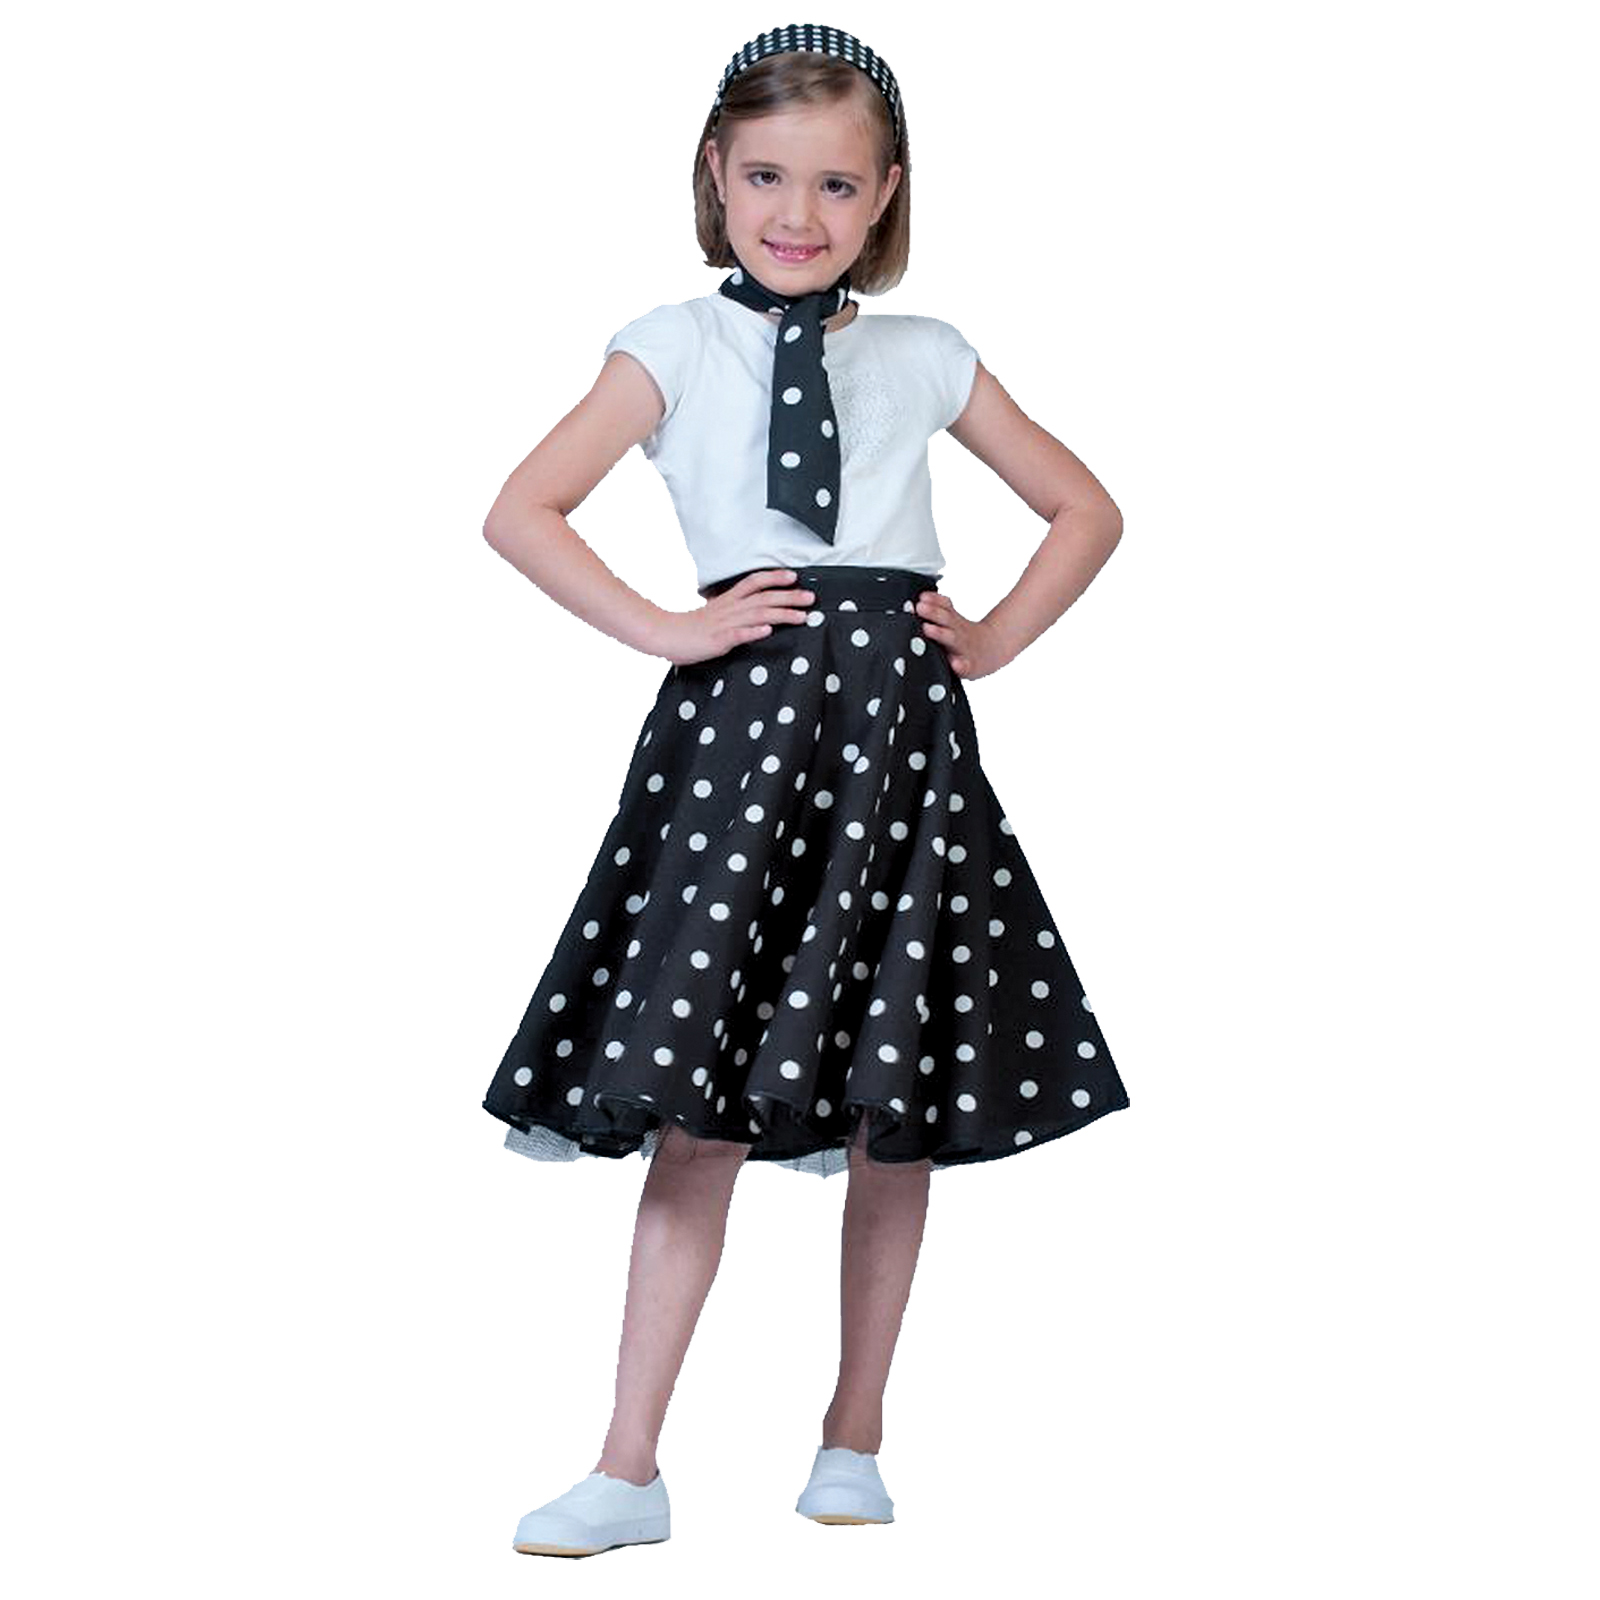 Girls Sock Hop Skirt Halloween Costume - Black Size: One Size Fits Most